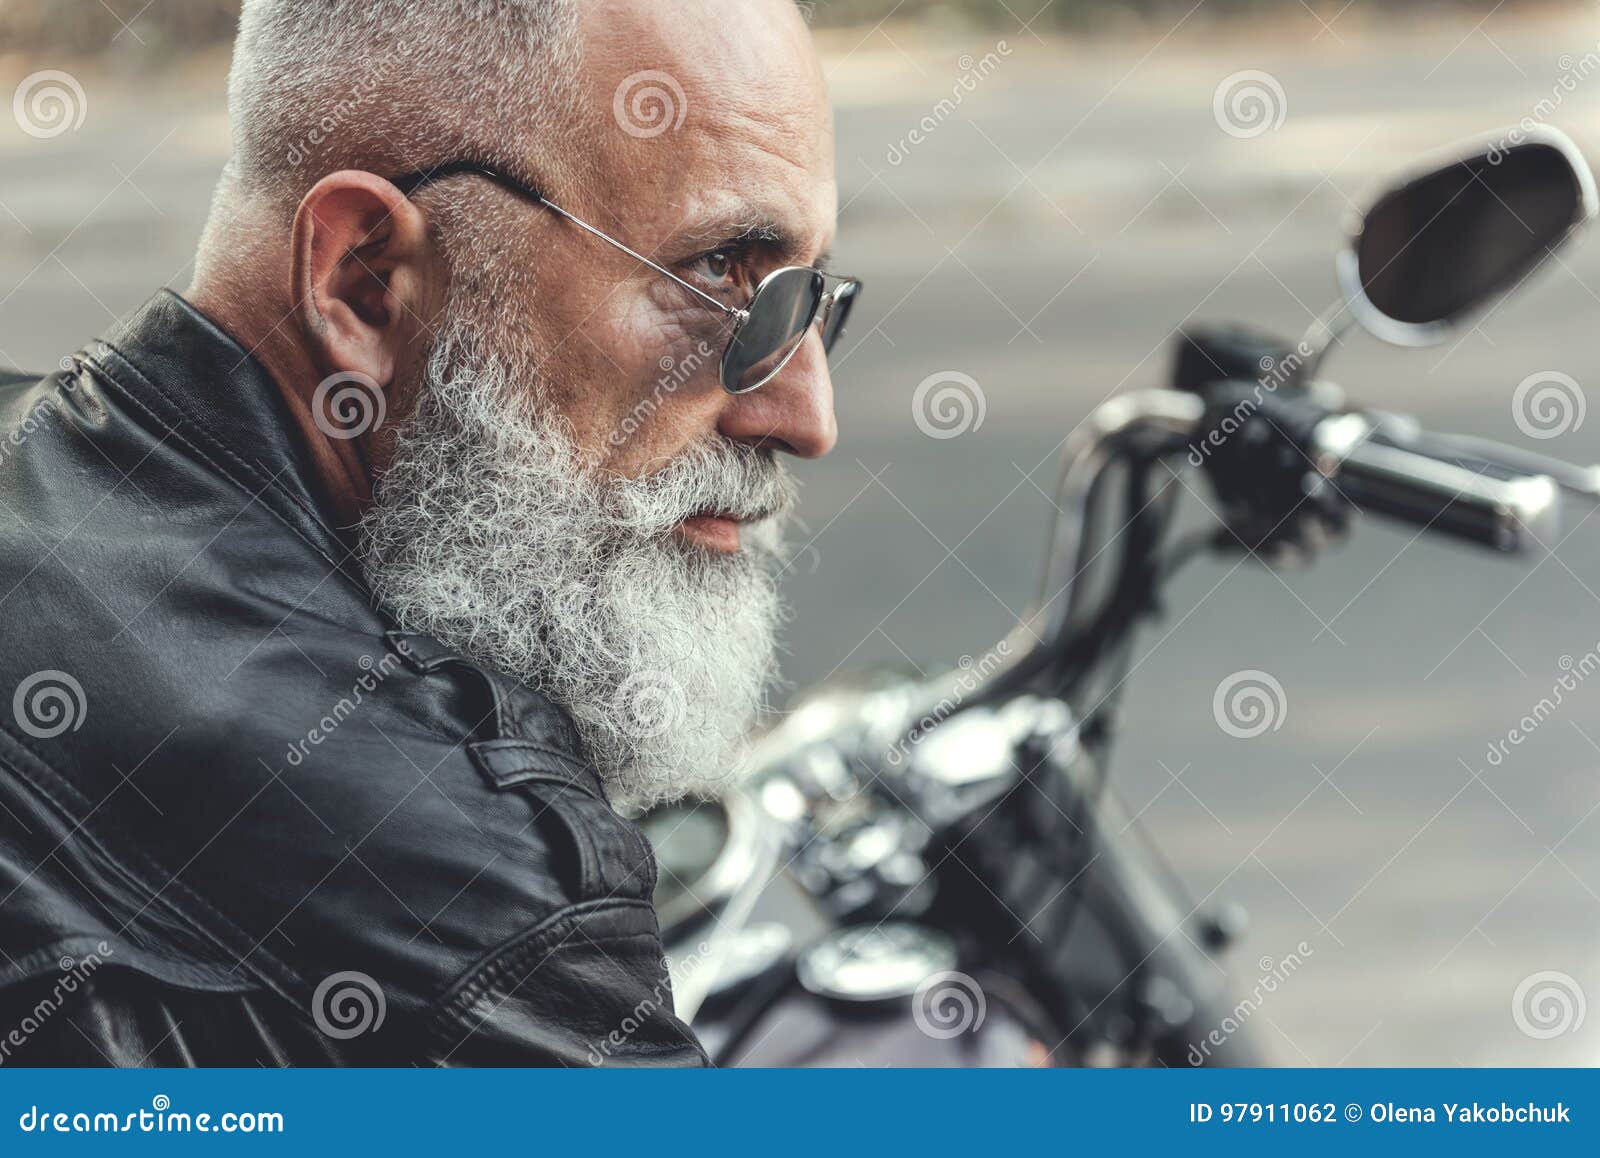 Concentrated Old Man at Motorbike Stock Photo - Image of form ...